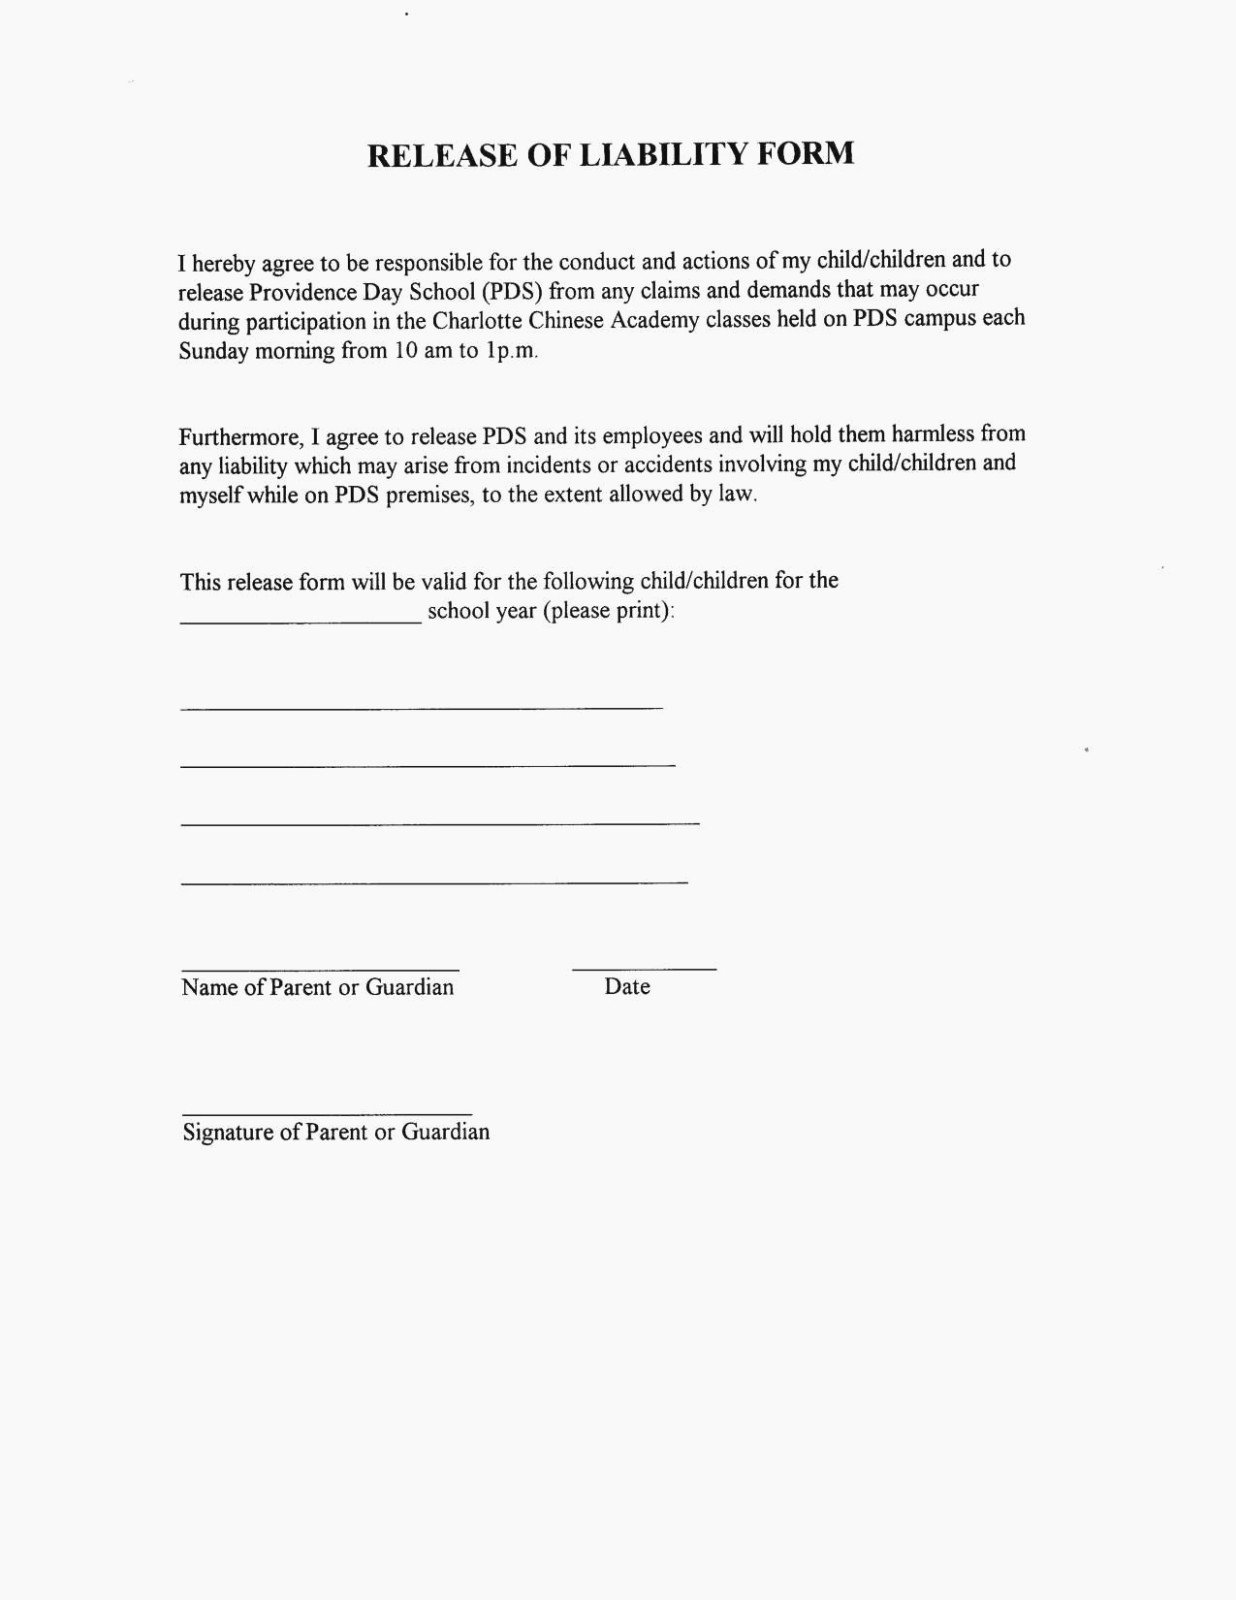 Personal Property Release form Template Awesome the Truth About Release